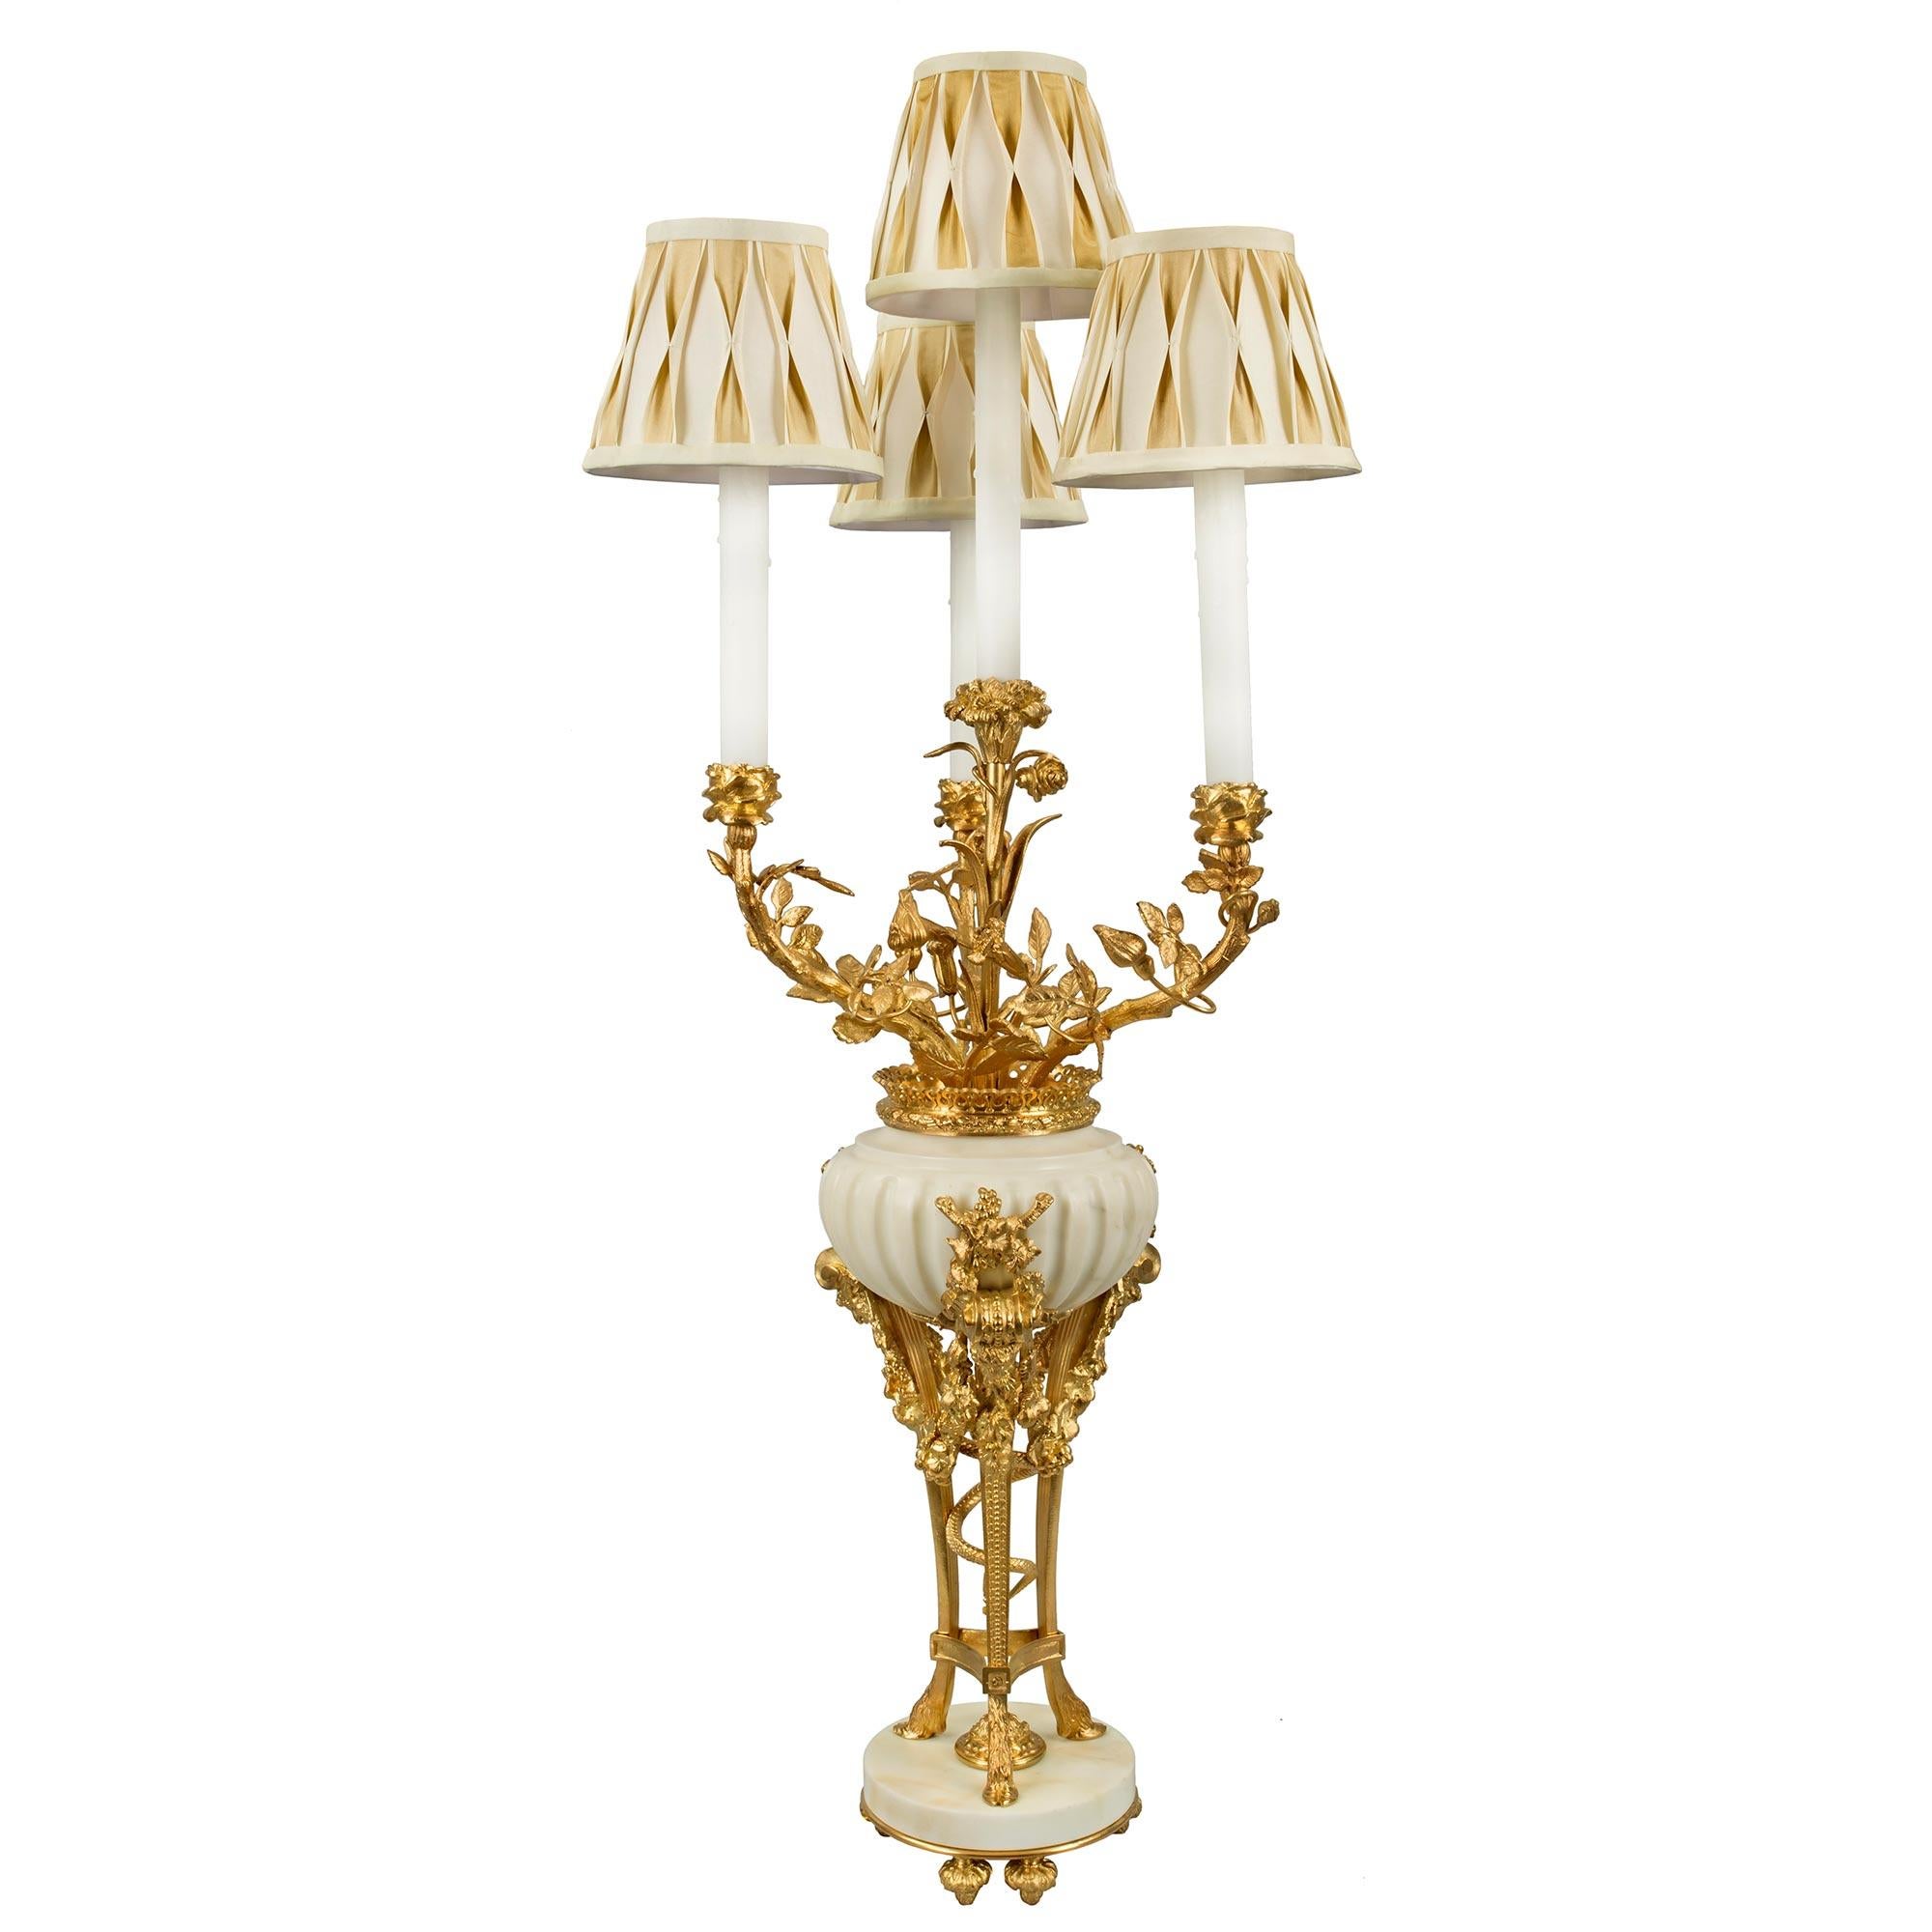 A pair of French 19th Louis XVI st. White Carrara marble and ormolu electrified candelabra lamps, after a model by Pierre Gouthière. Each lamp is raised by ormolu topie shaped feet below a circular marble base. Above is an ormolu tripod with hoof